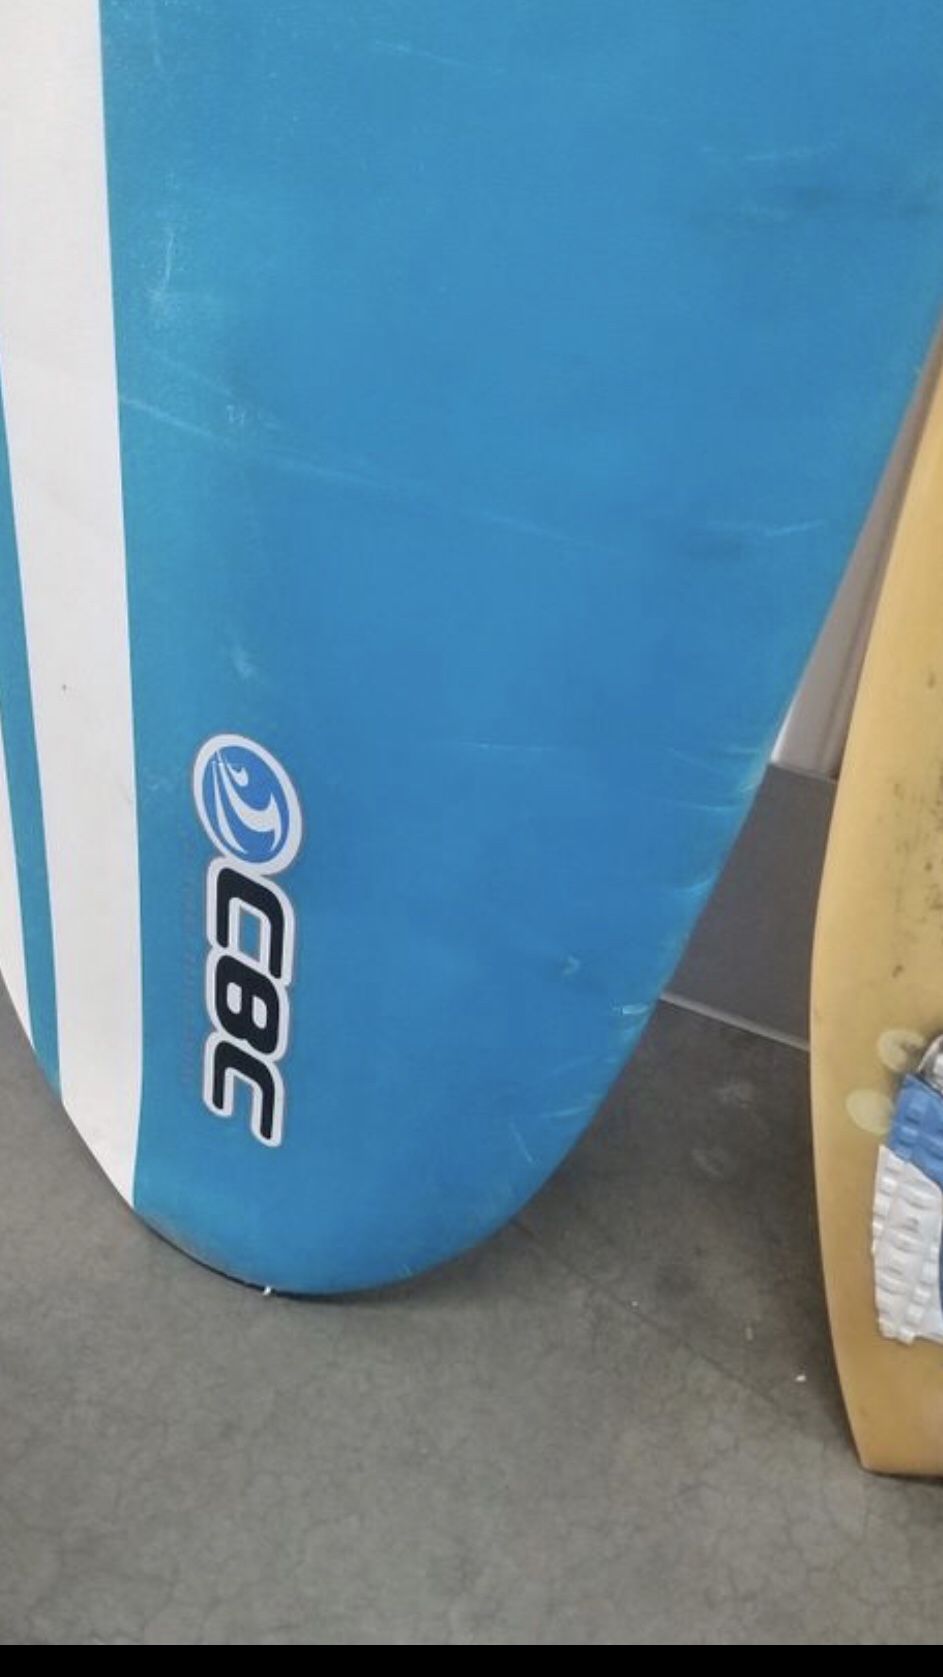 Chaos and CBC surfboards